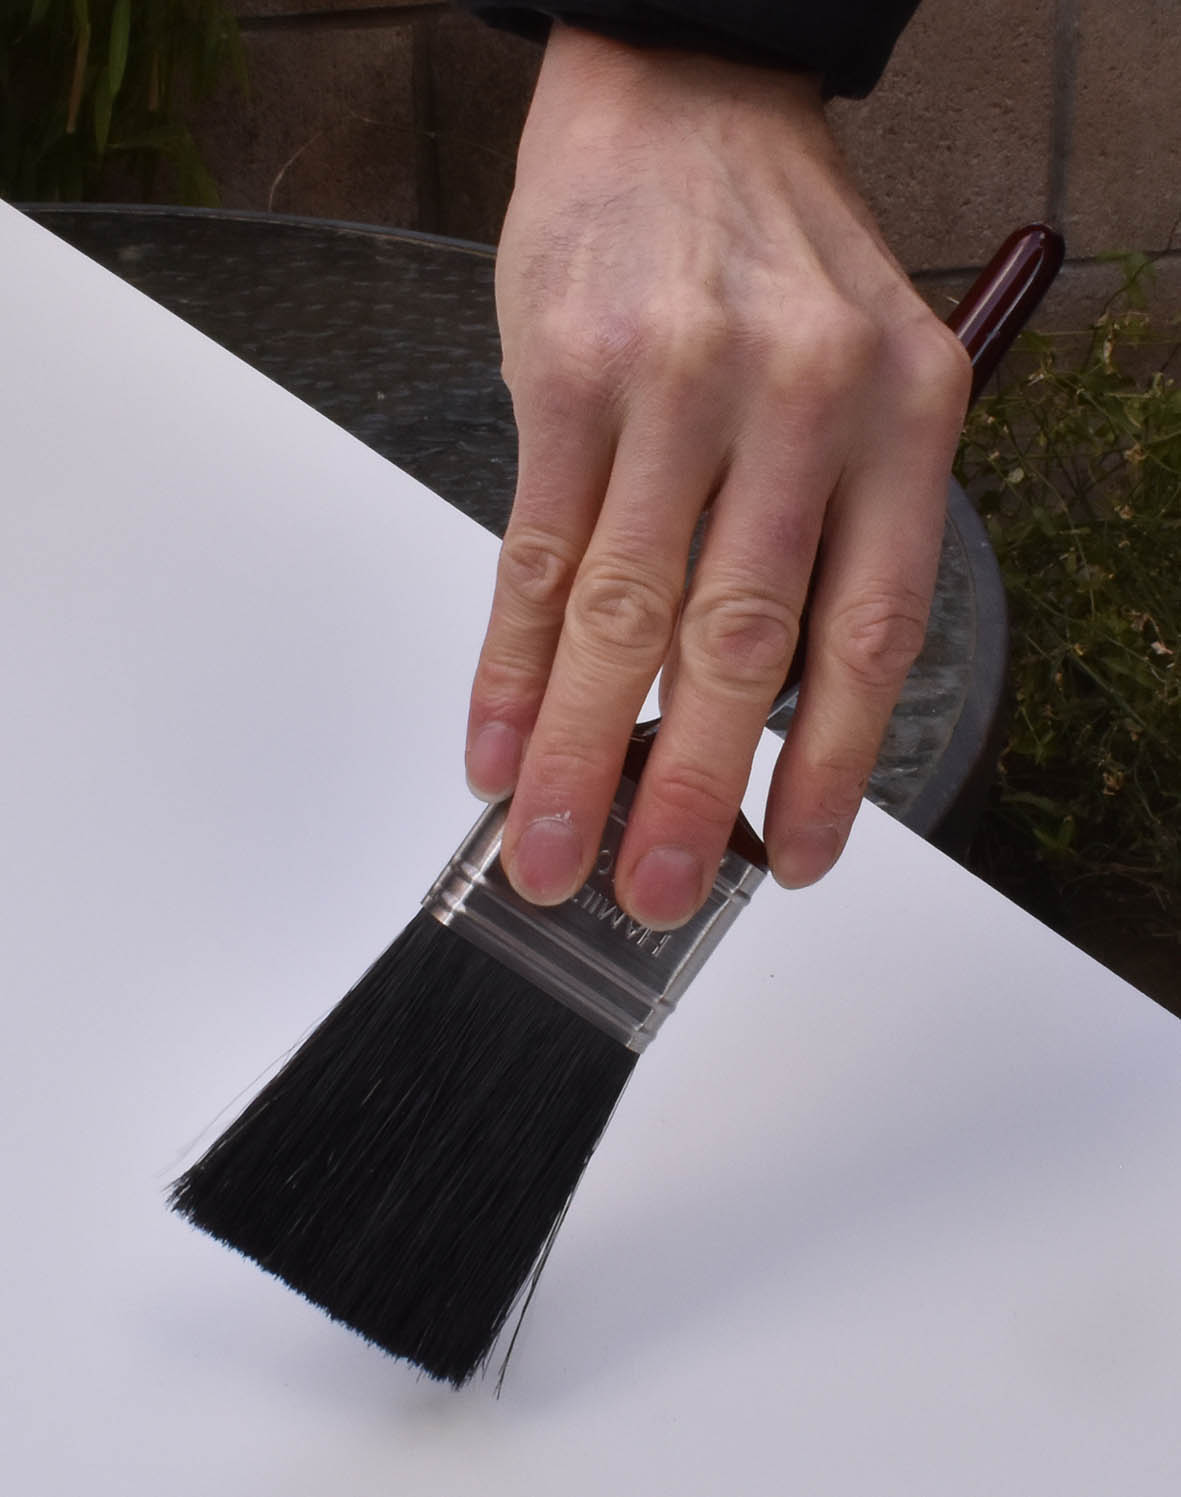 Painting signs with a paint brush